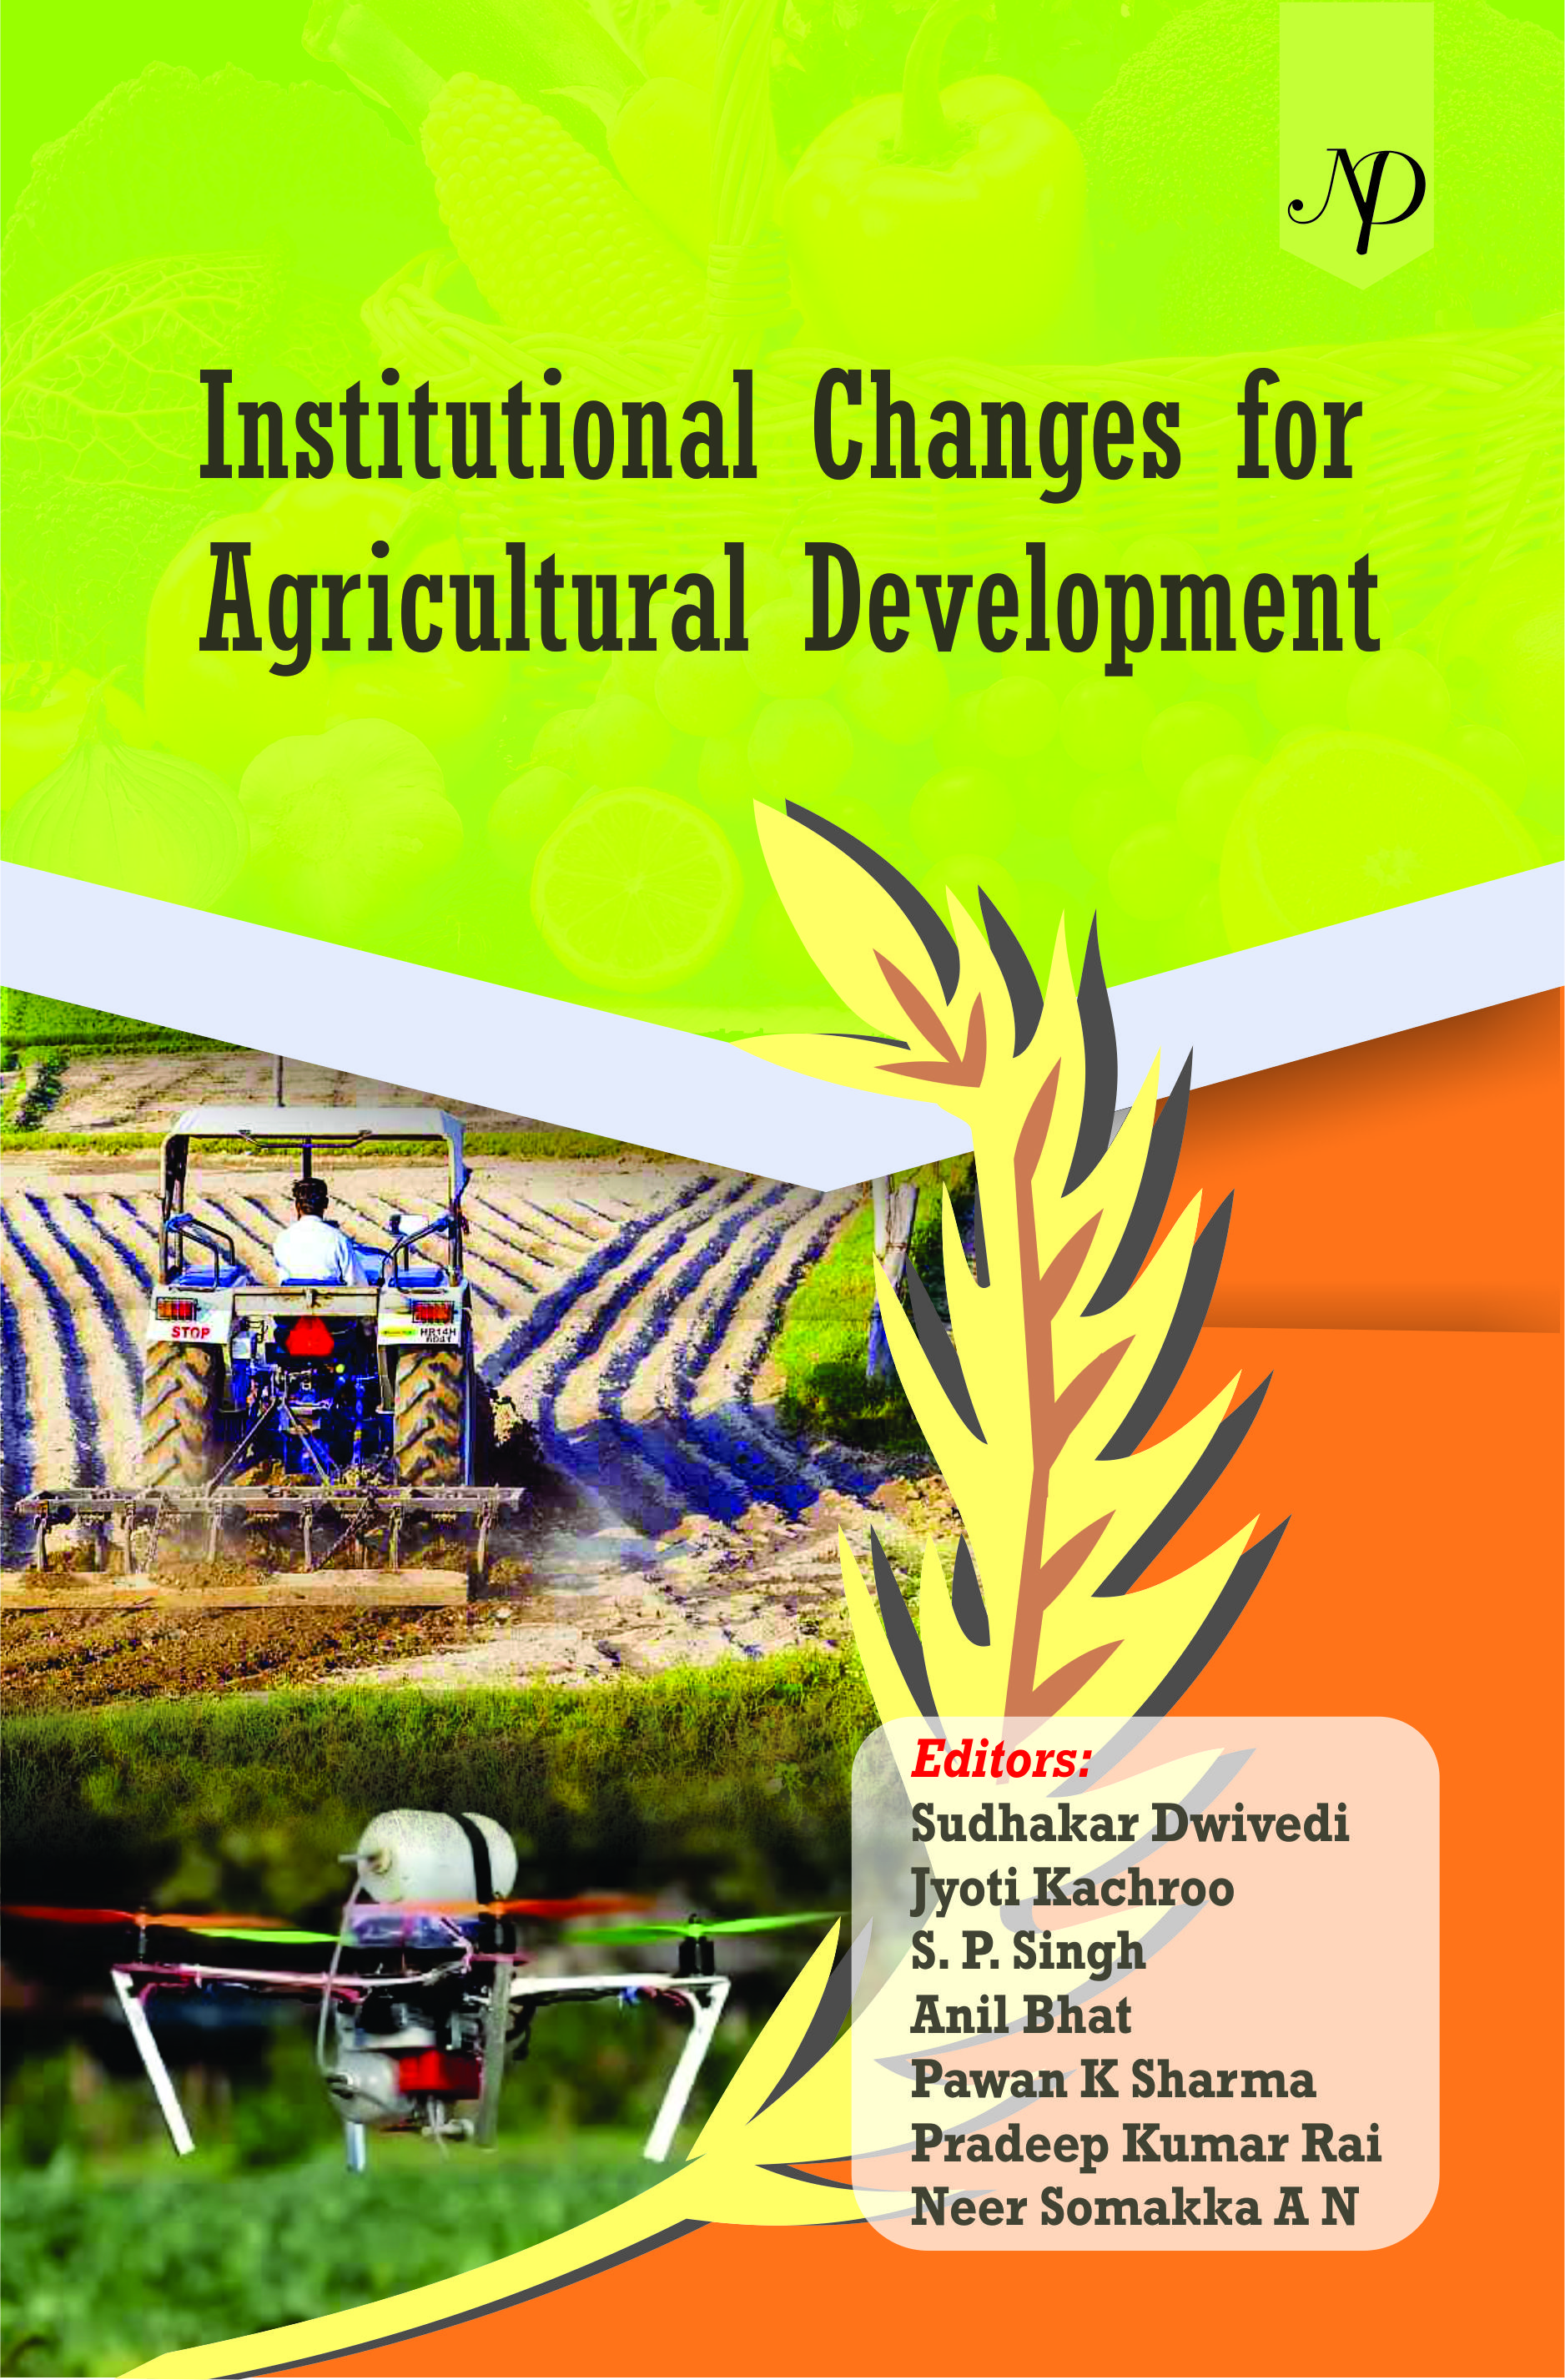 Institutinal Changes for  Agricultural Development Cover.jpg